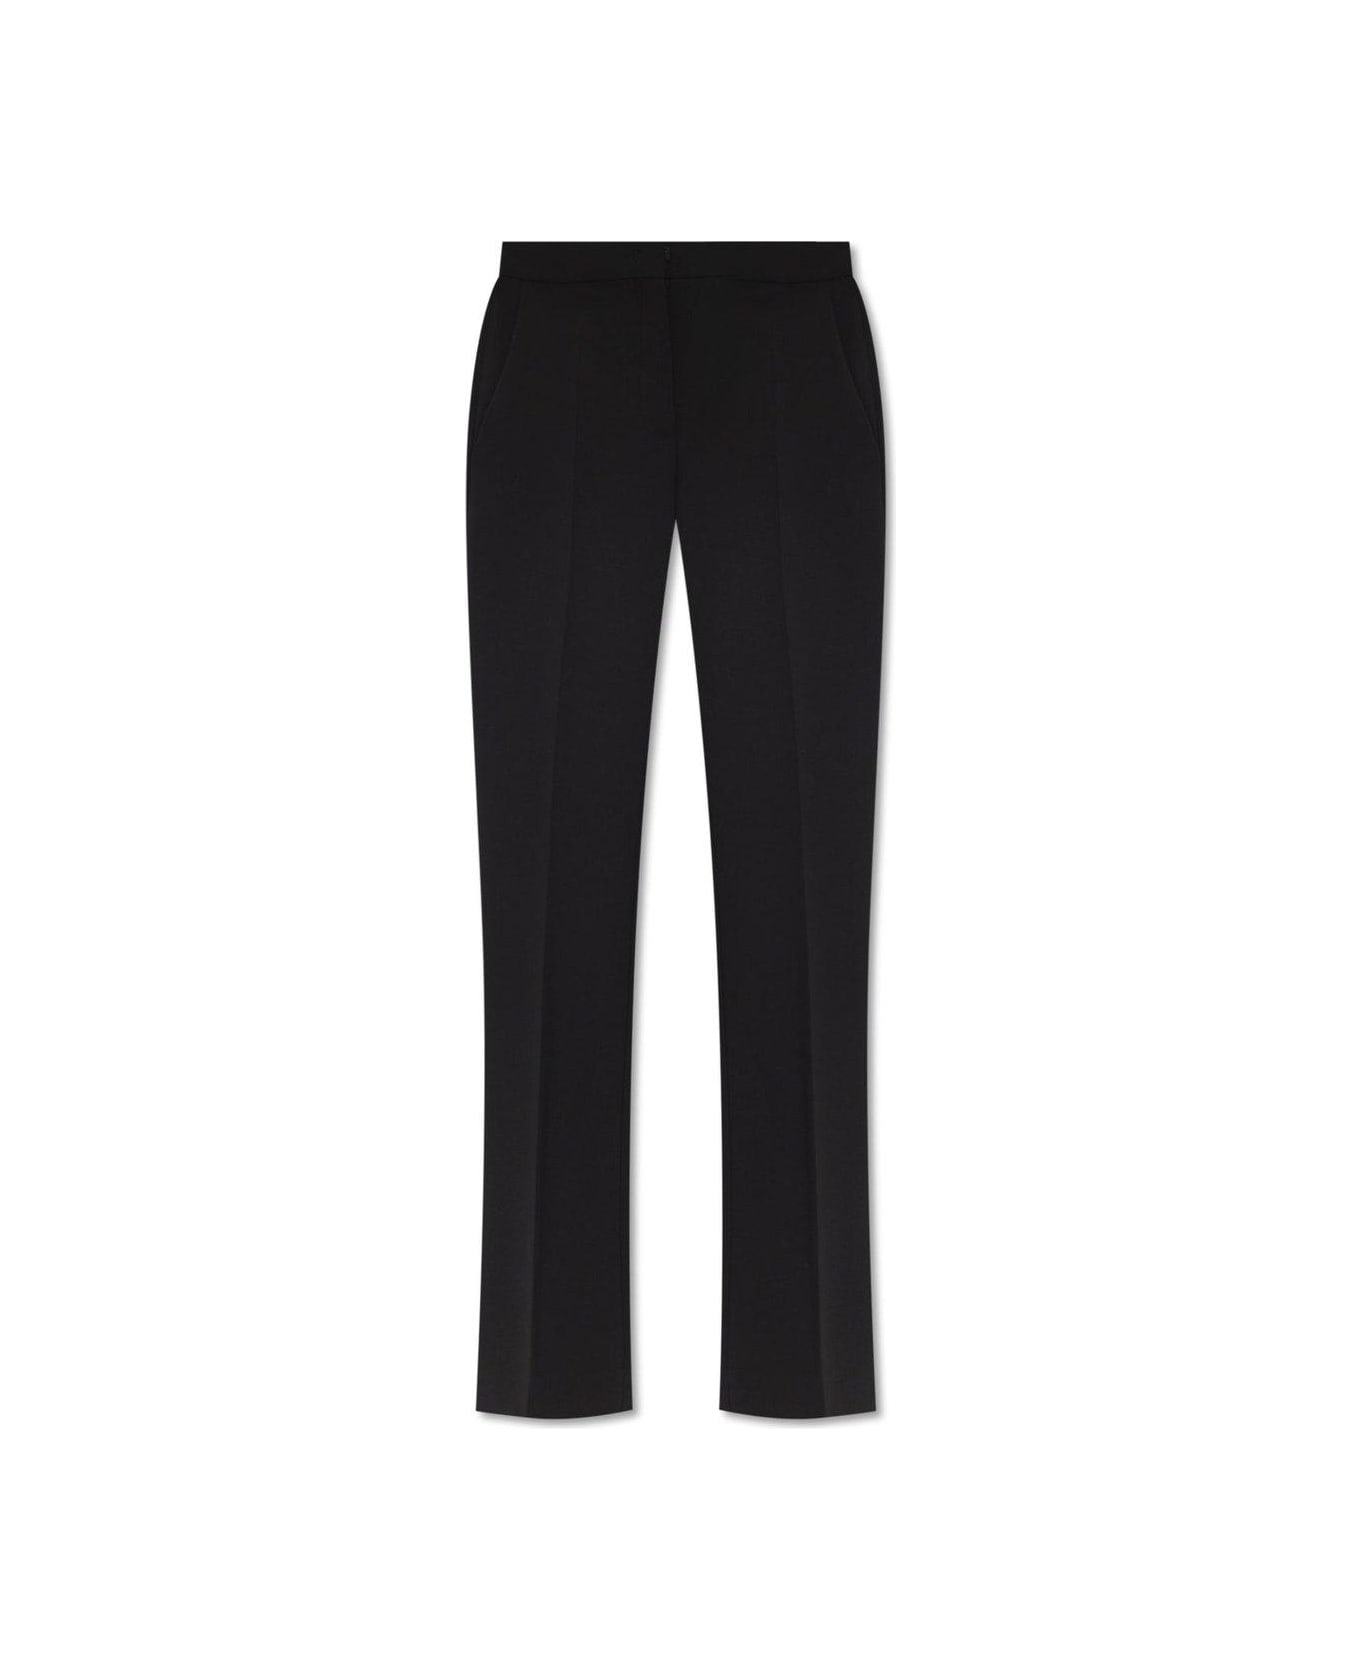 Moschino Pleat Front Trousers Moschino - BLACK